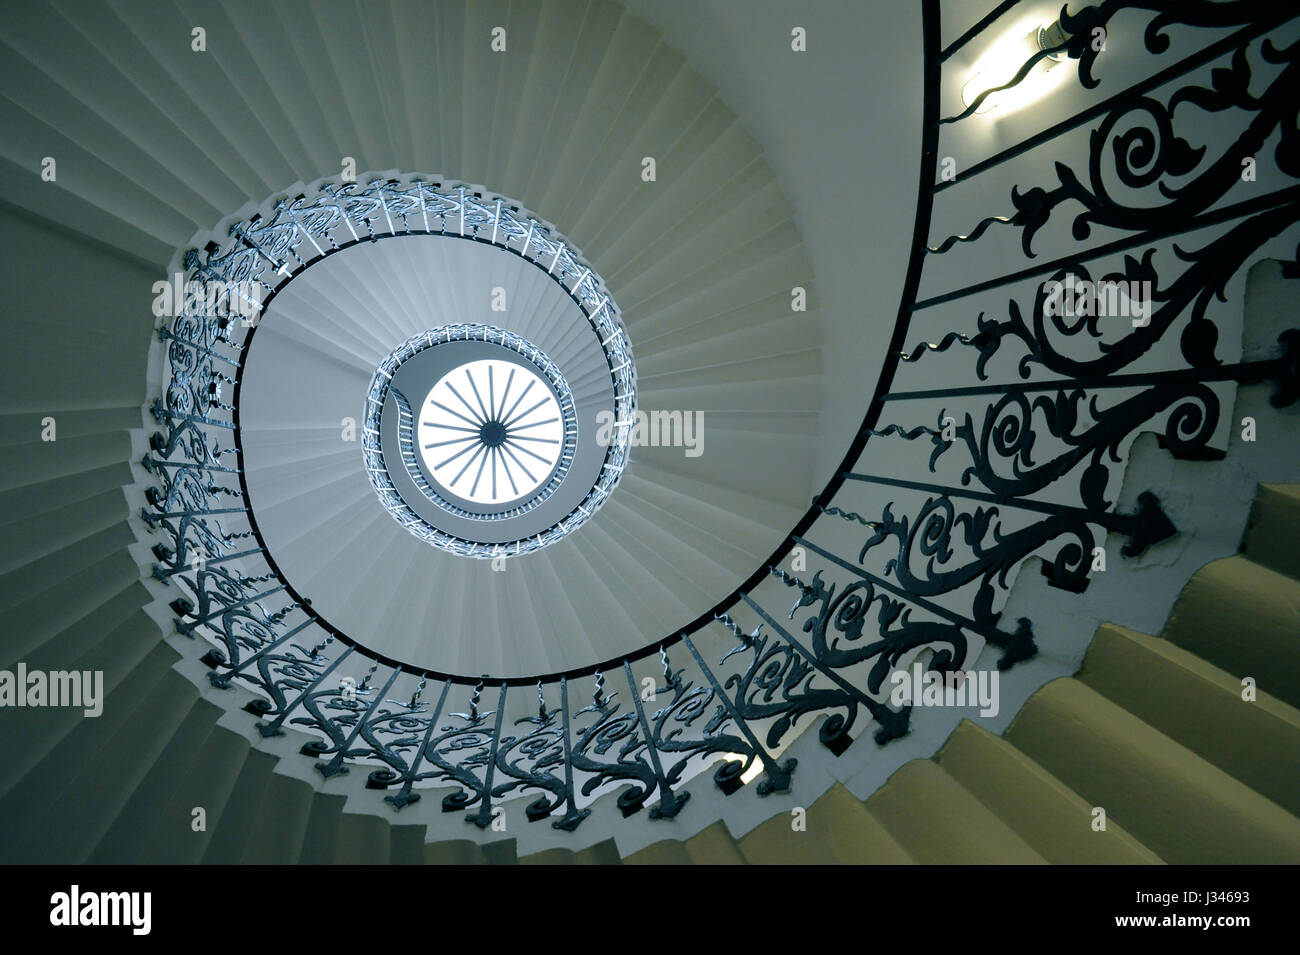 The iconic Tulip Stairs in Queen’s House, Greenwich, London; built in the 17th century, the first self-supporting geometric spiral stairs in Britain. Stock Photo